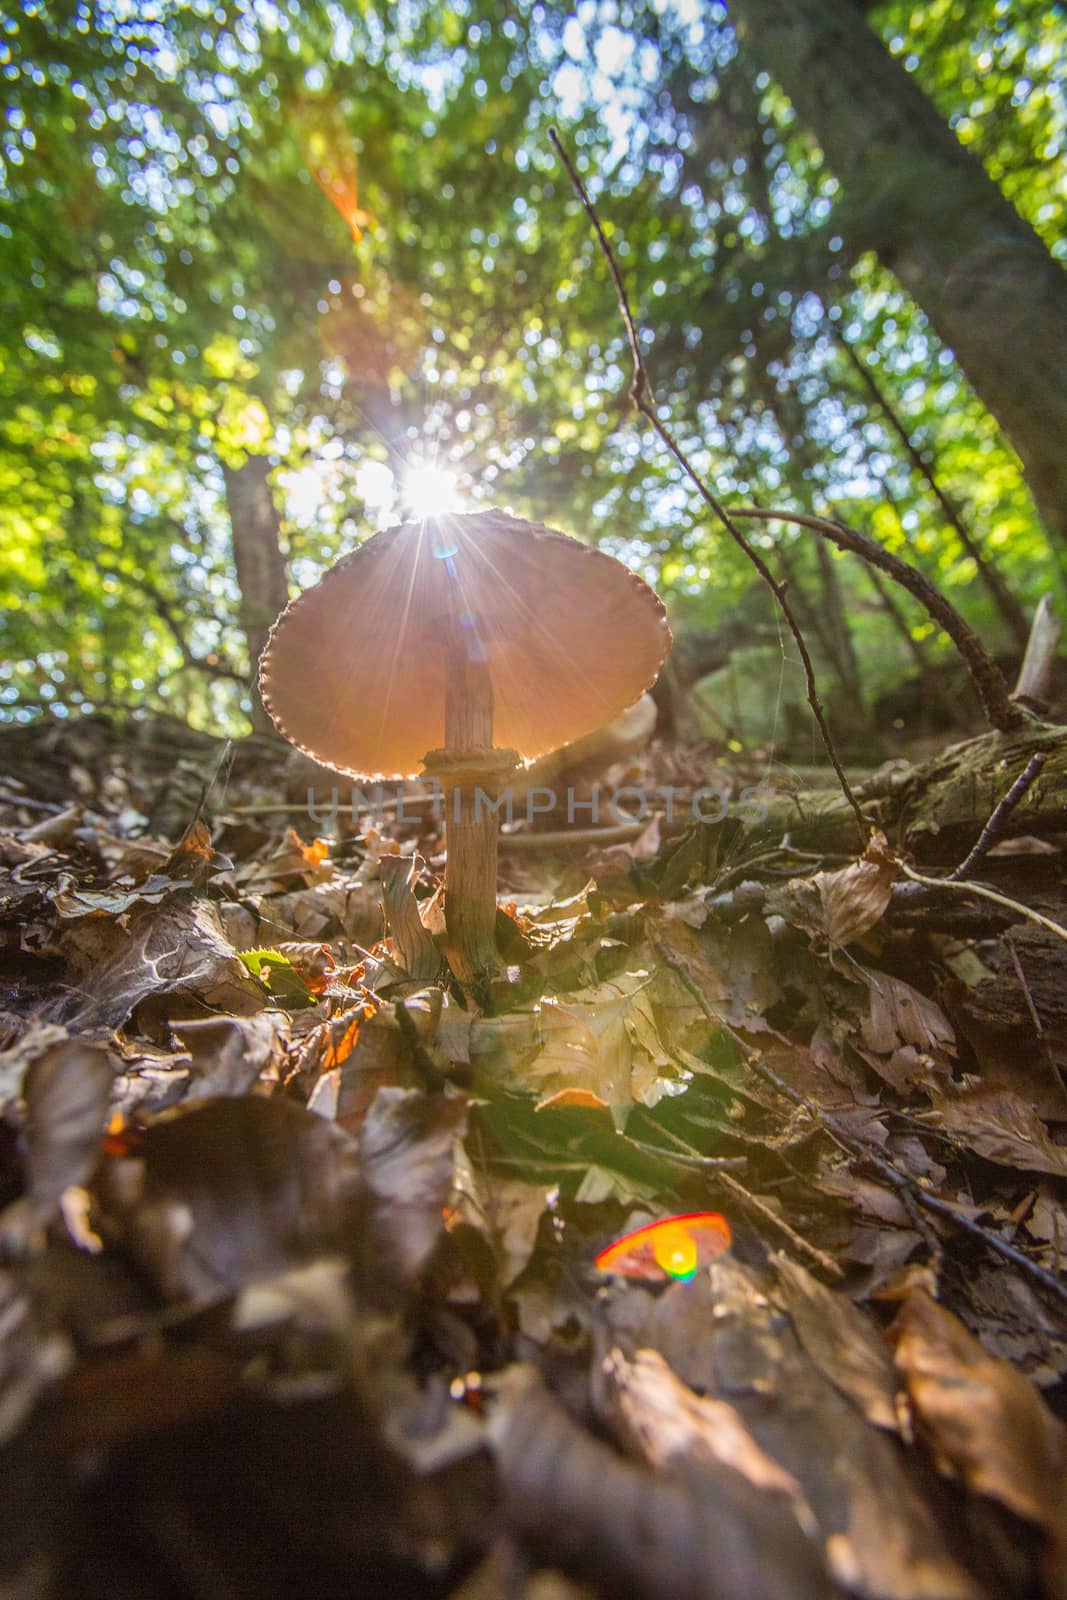 Mushroom in sunlight in germany at a nice forest